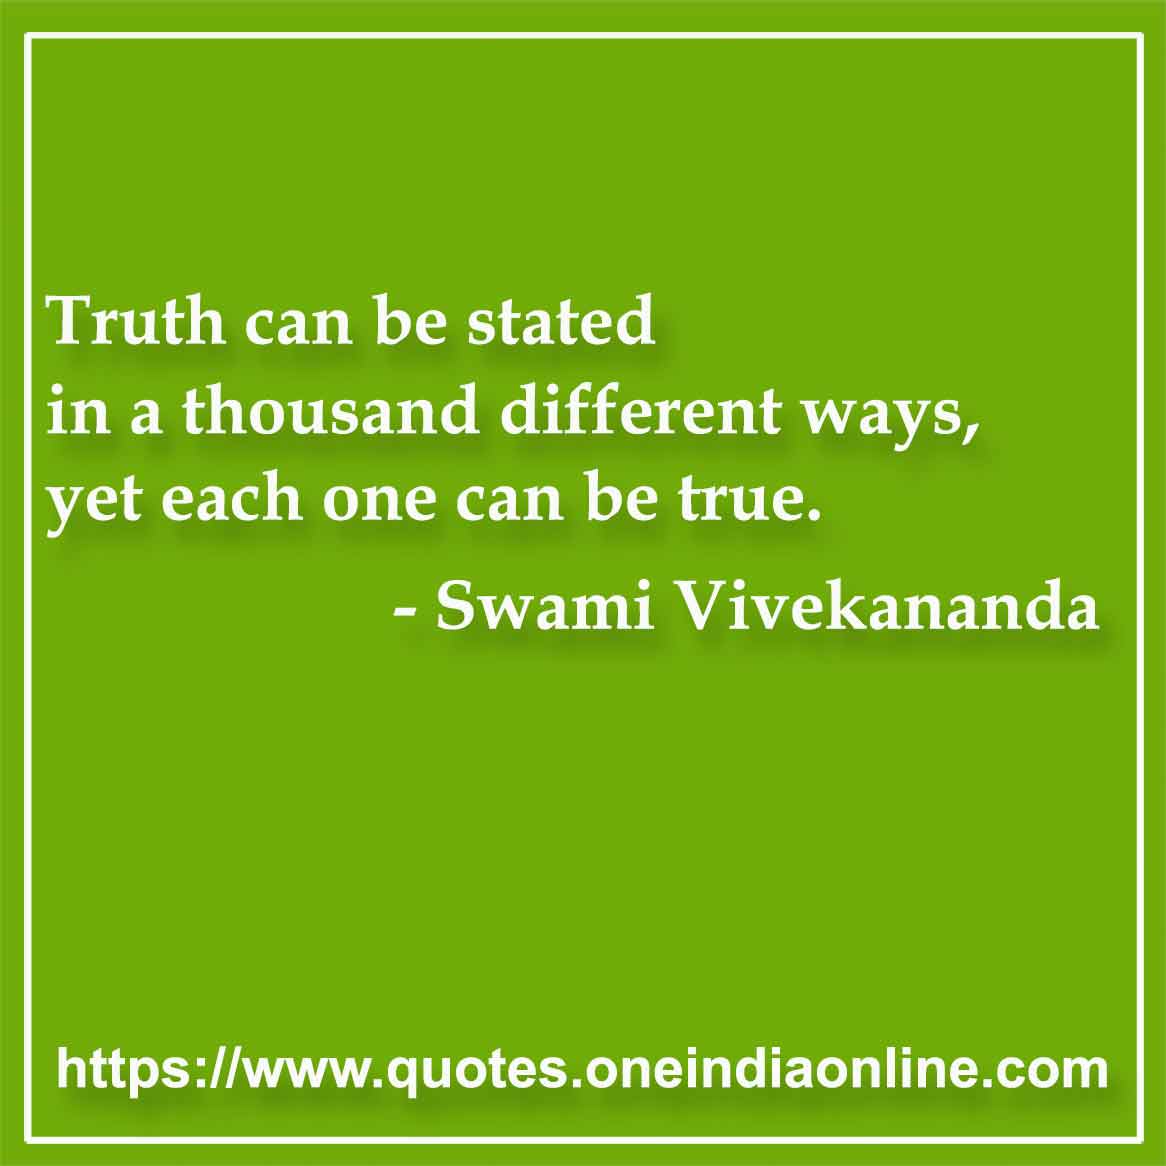 Swami Vivekananda Quotes in English Quotations and Sayings